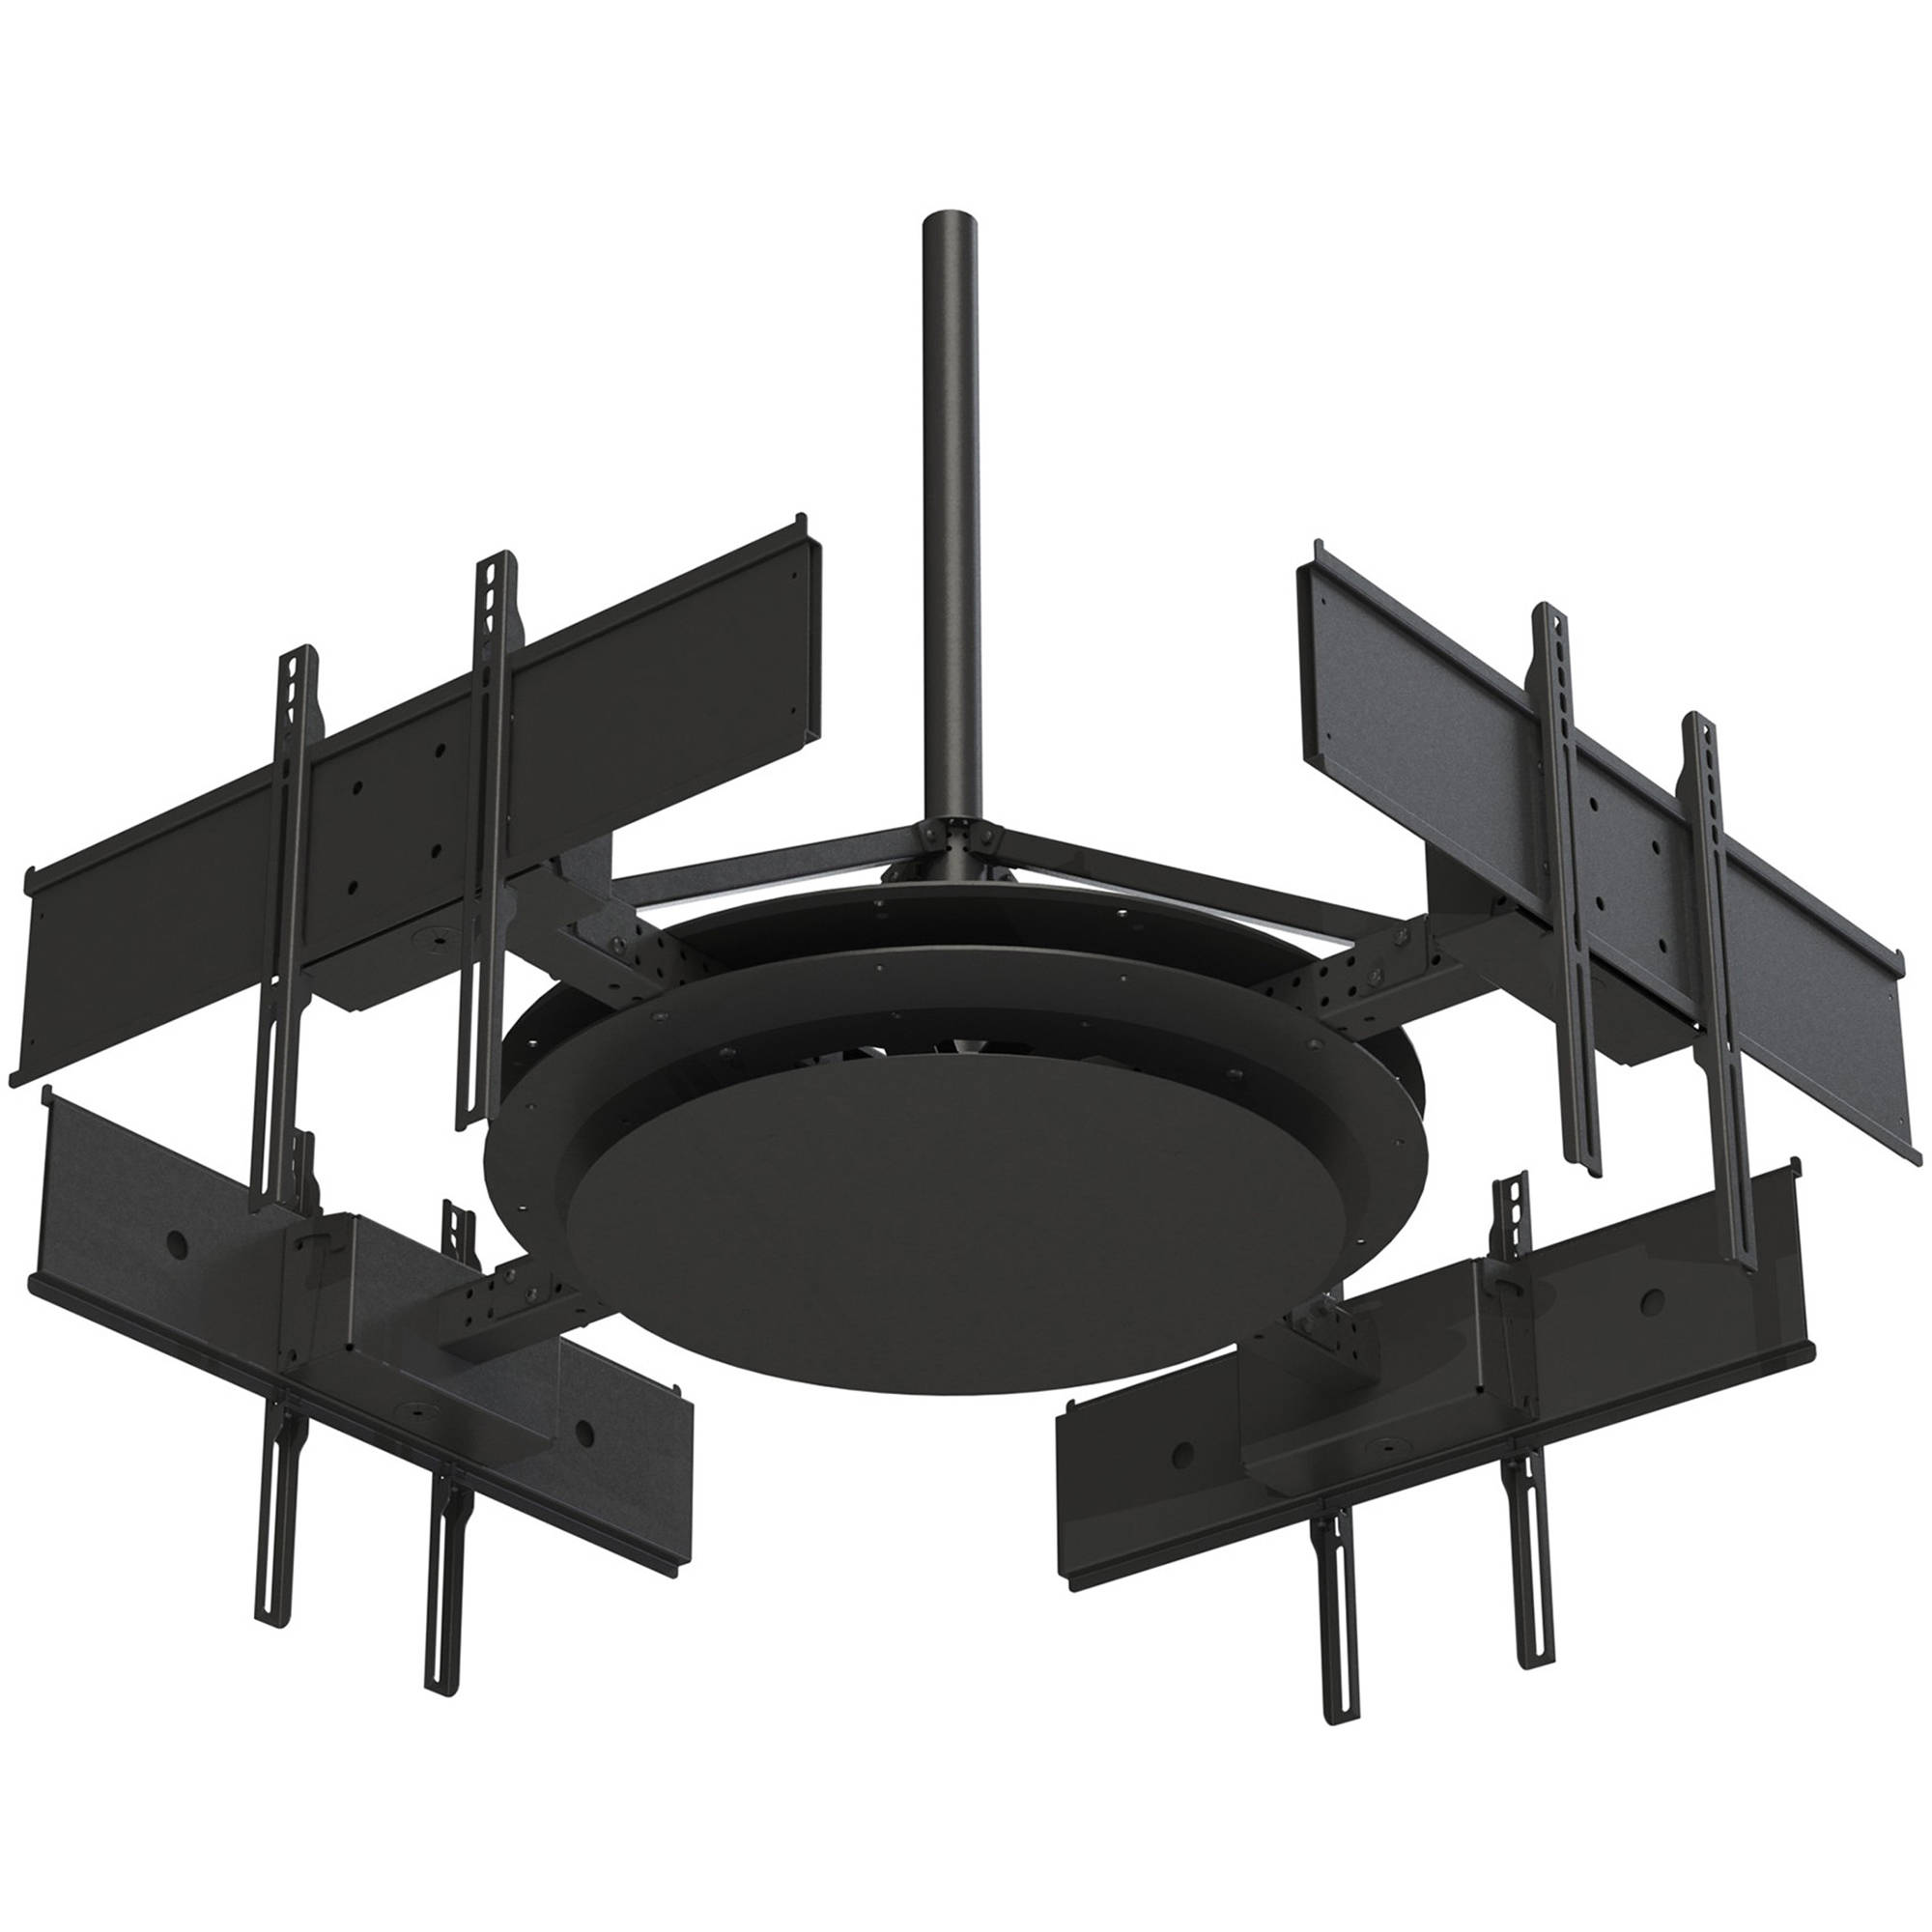 Peerless Av Multi Display Ceiling Mount With Four Telescoping Arms For 37 To 75 Displays